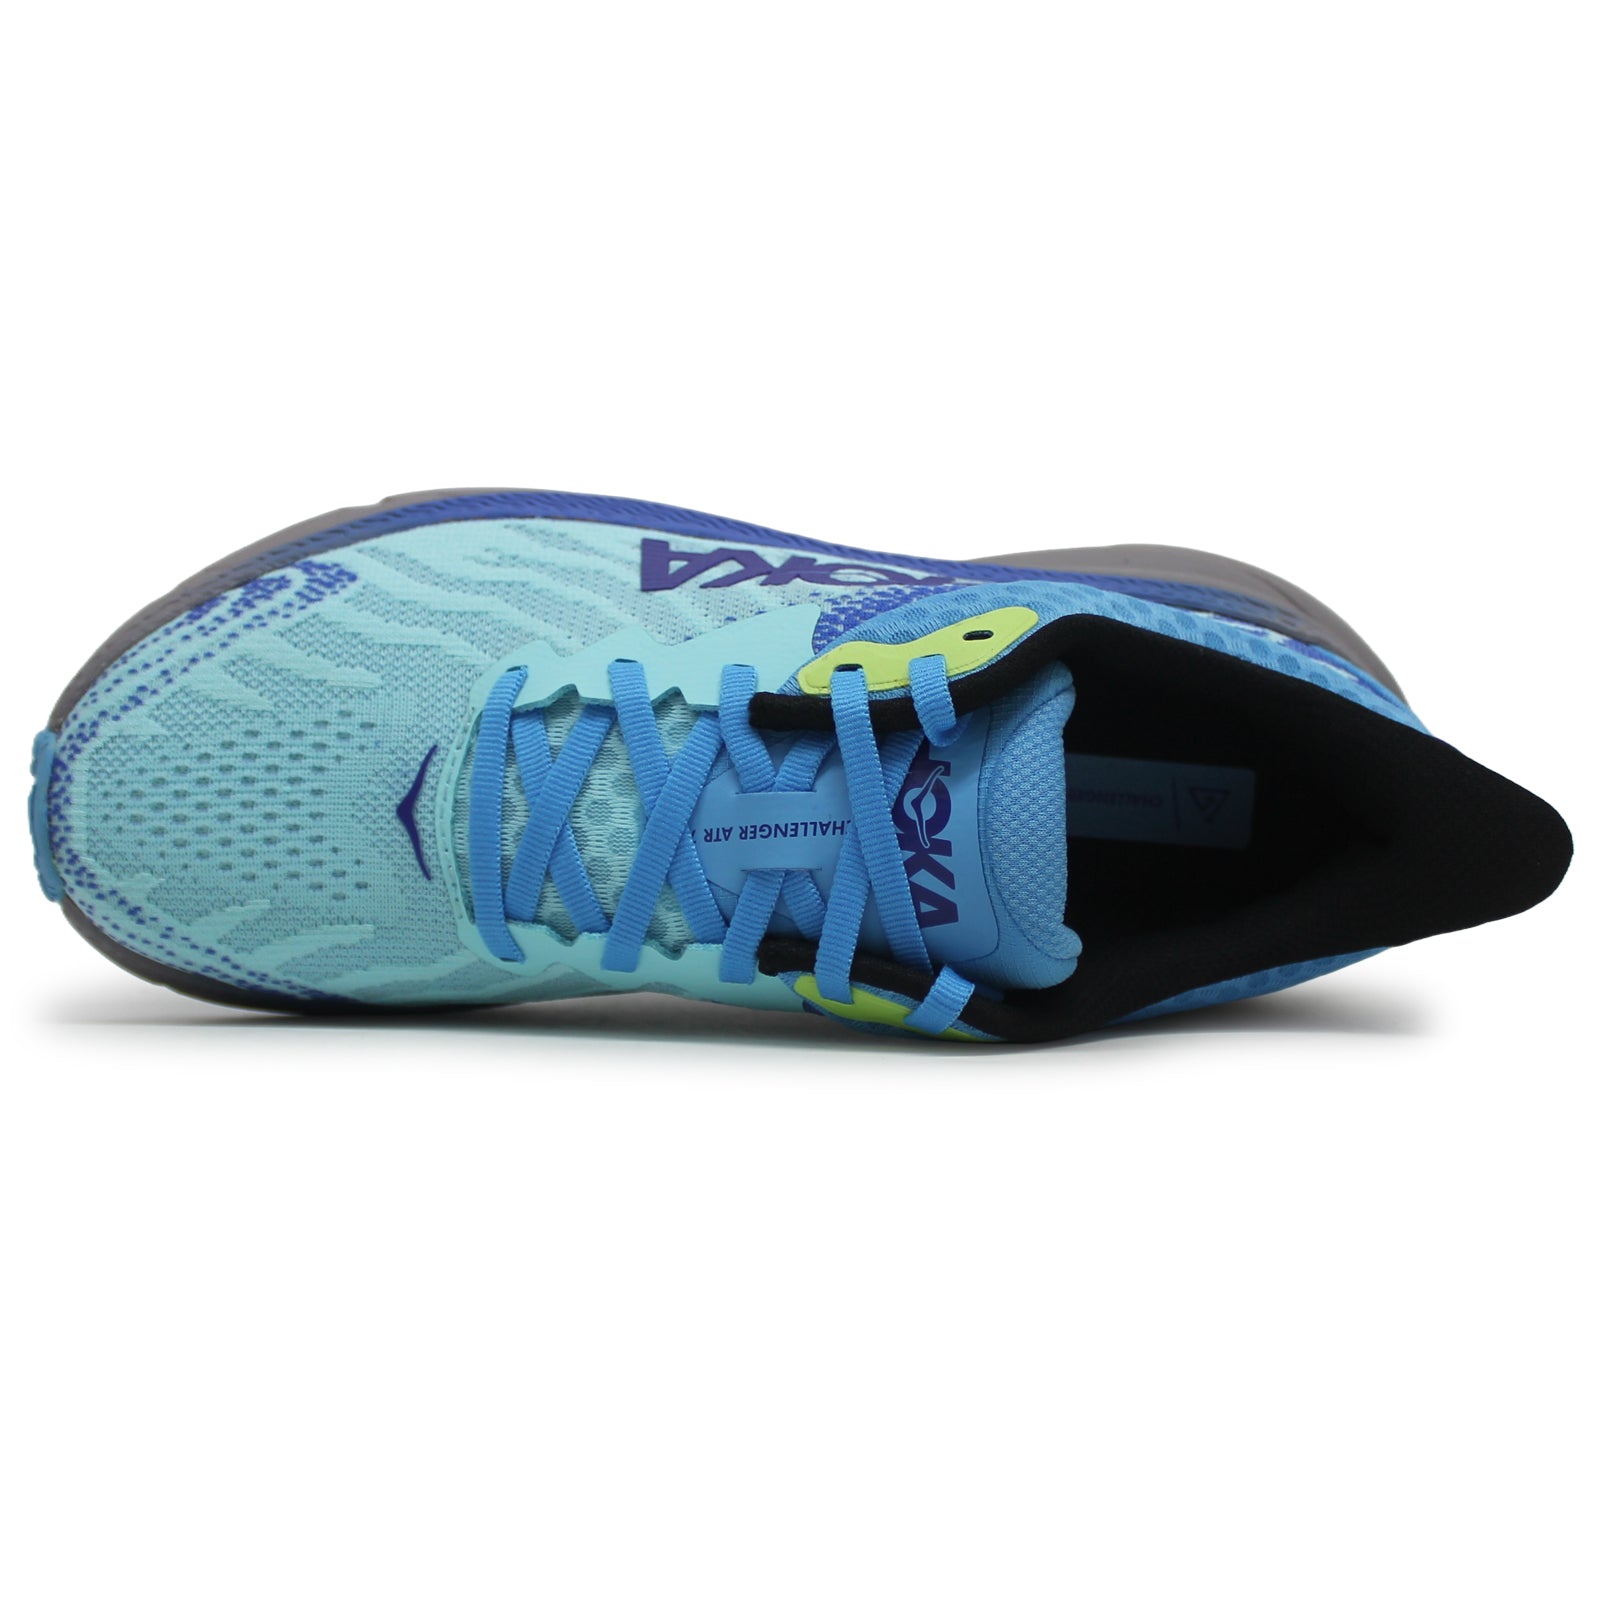 Hoka One One Challenger ATR 7 Textile Mens Sneakers#color_Swim Day Cloudless